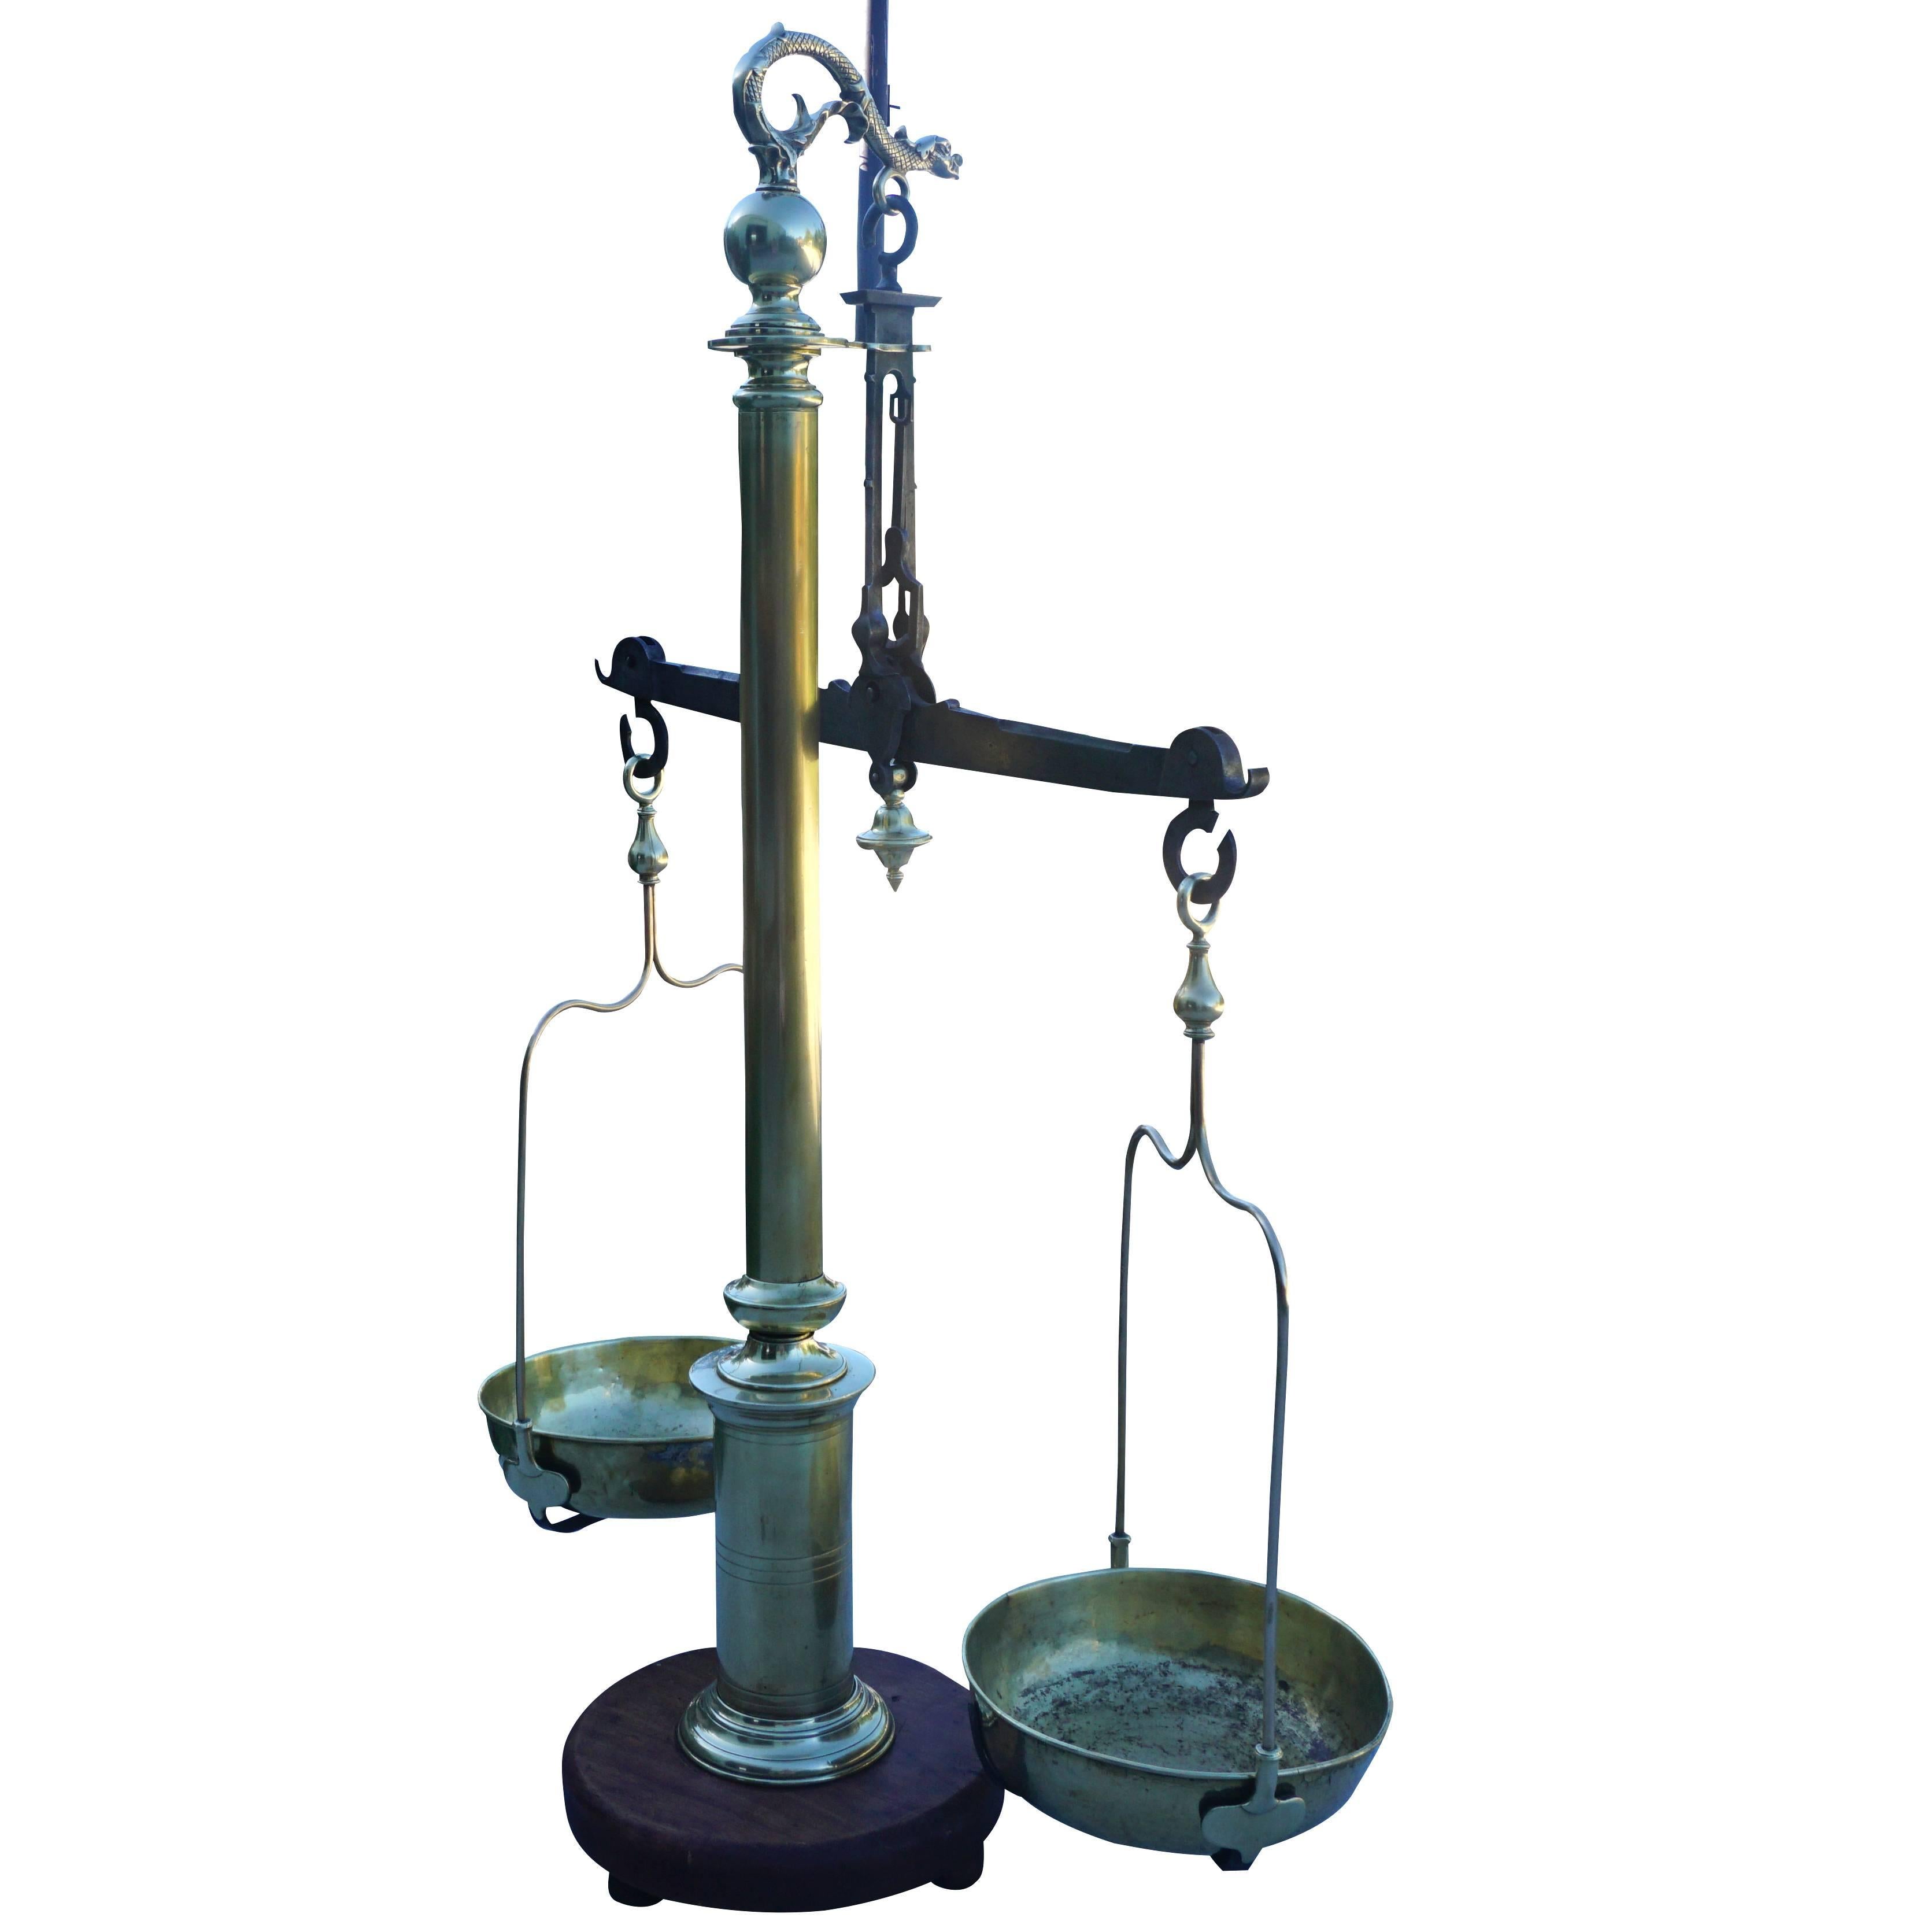 Antique, 19th century polished bronze and brass scale. This large-scale is a typical scale used in a French pharmacy in the 1800s. The top has a finial with a balance beam holding two brass platters, the arrow for equal balance is beneath the